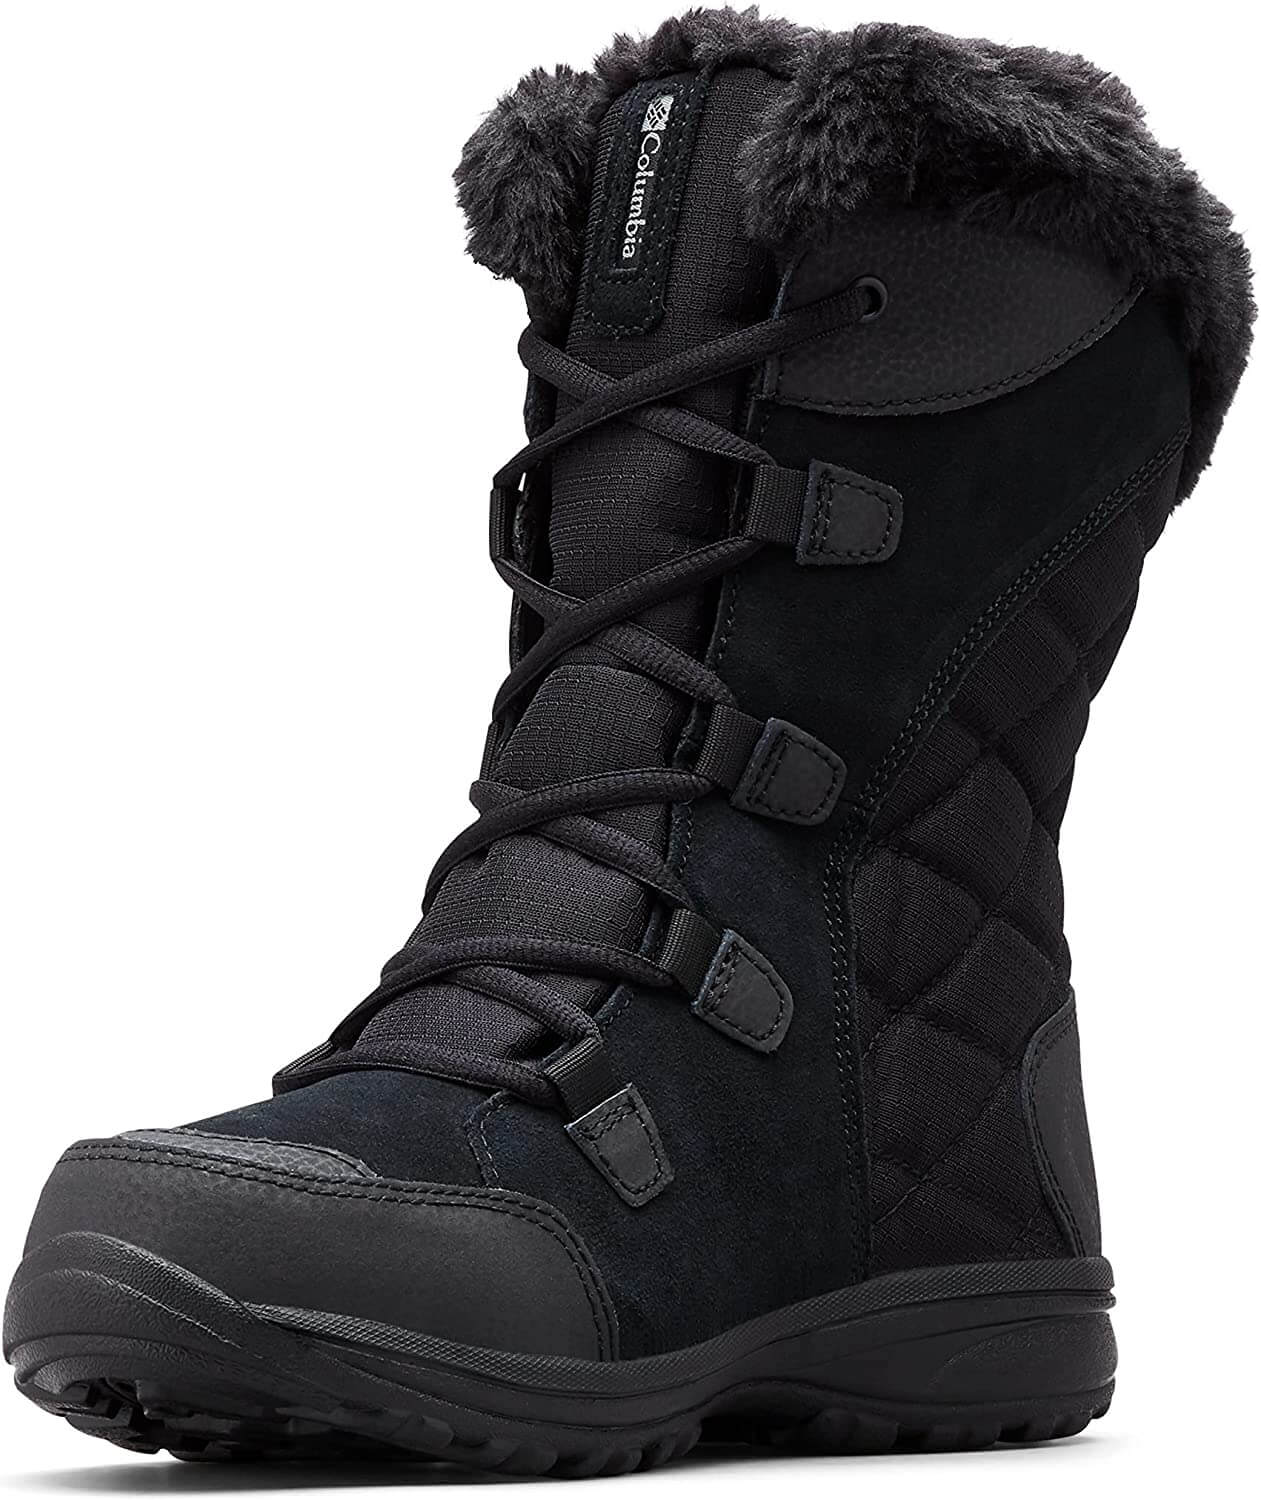 Best Snow Boots For Women: Top 5 Products Most Recommended By Experts ...